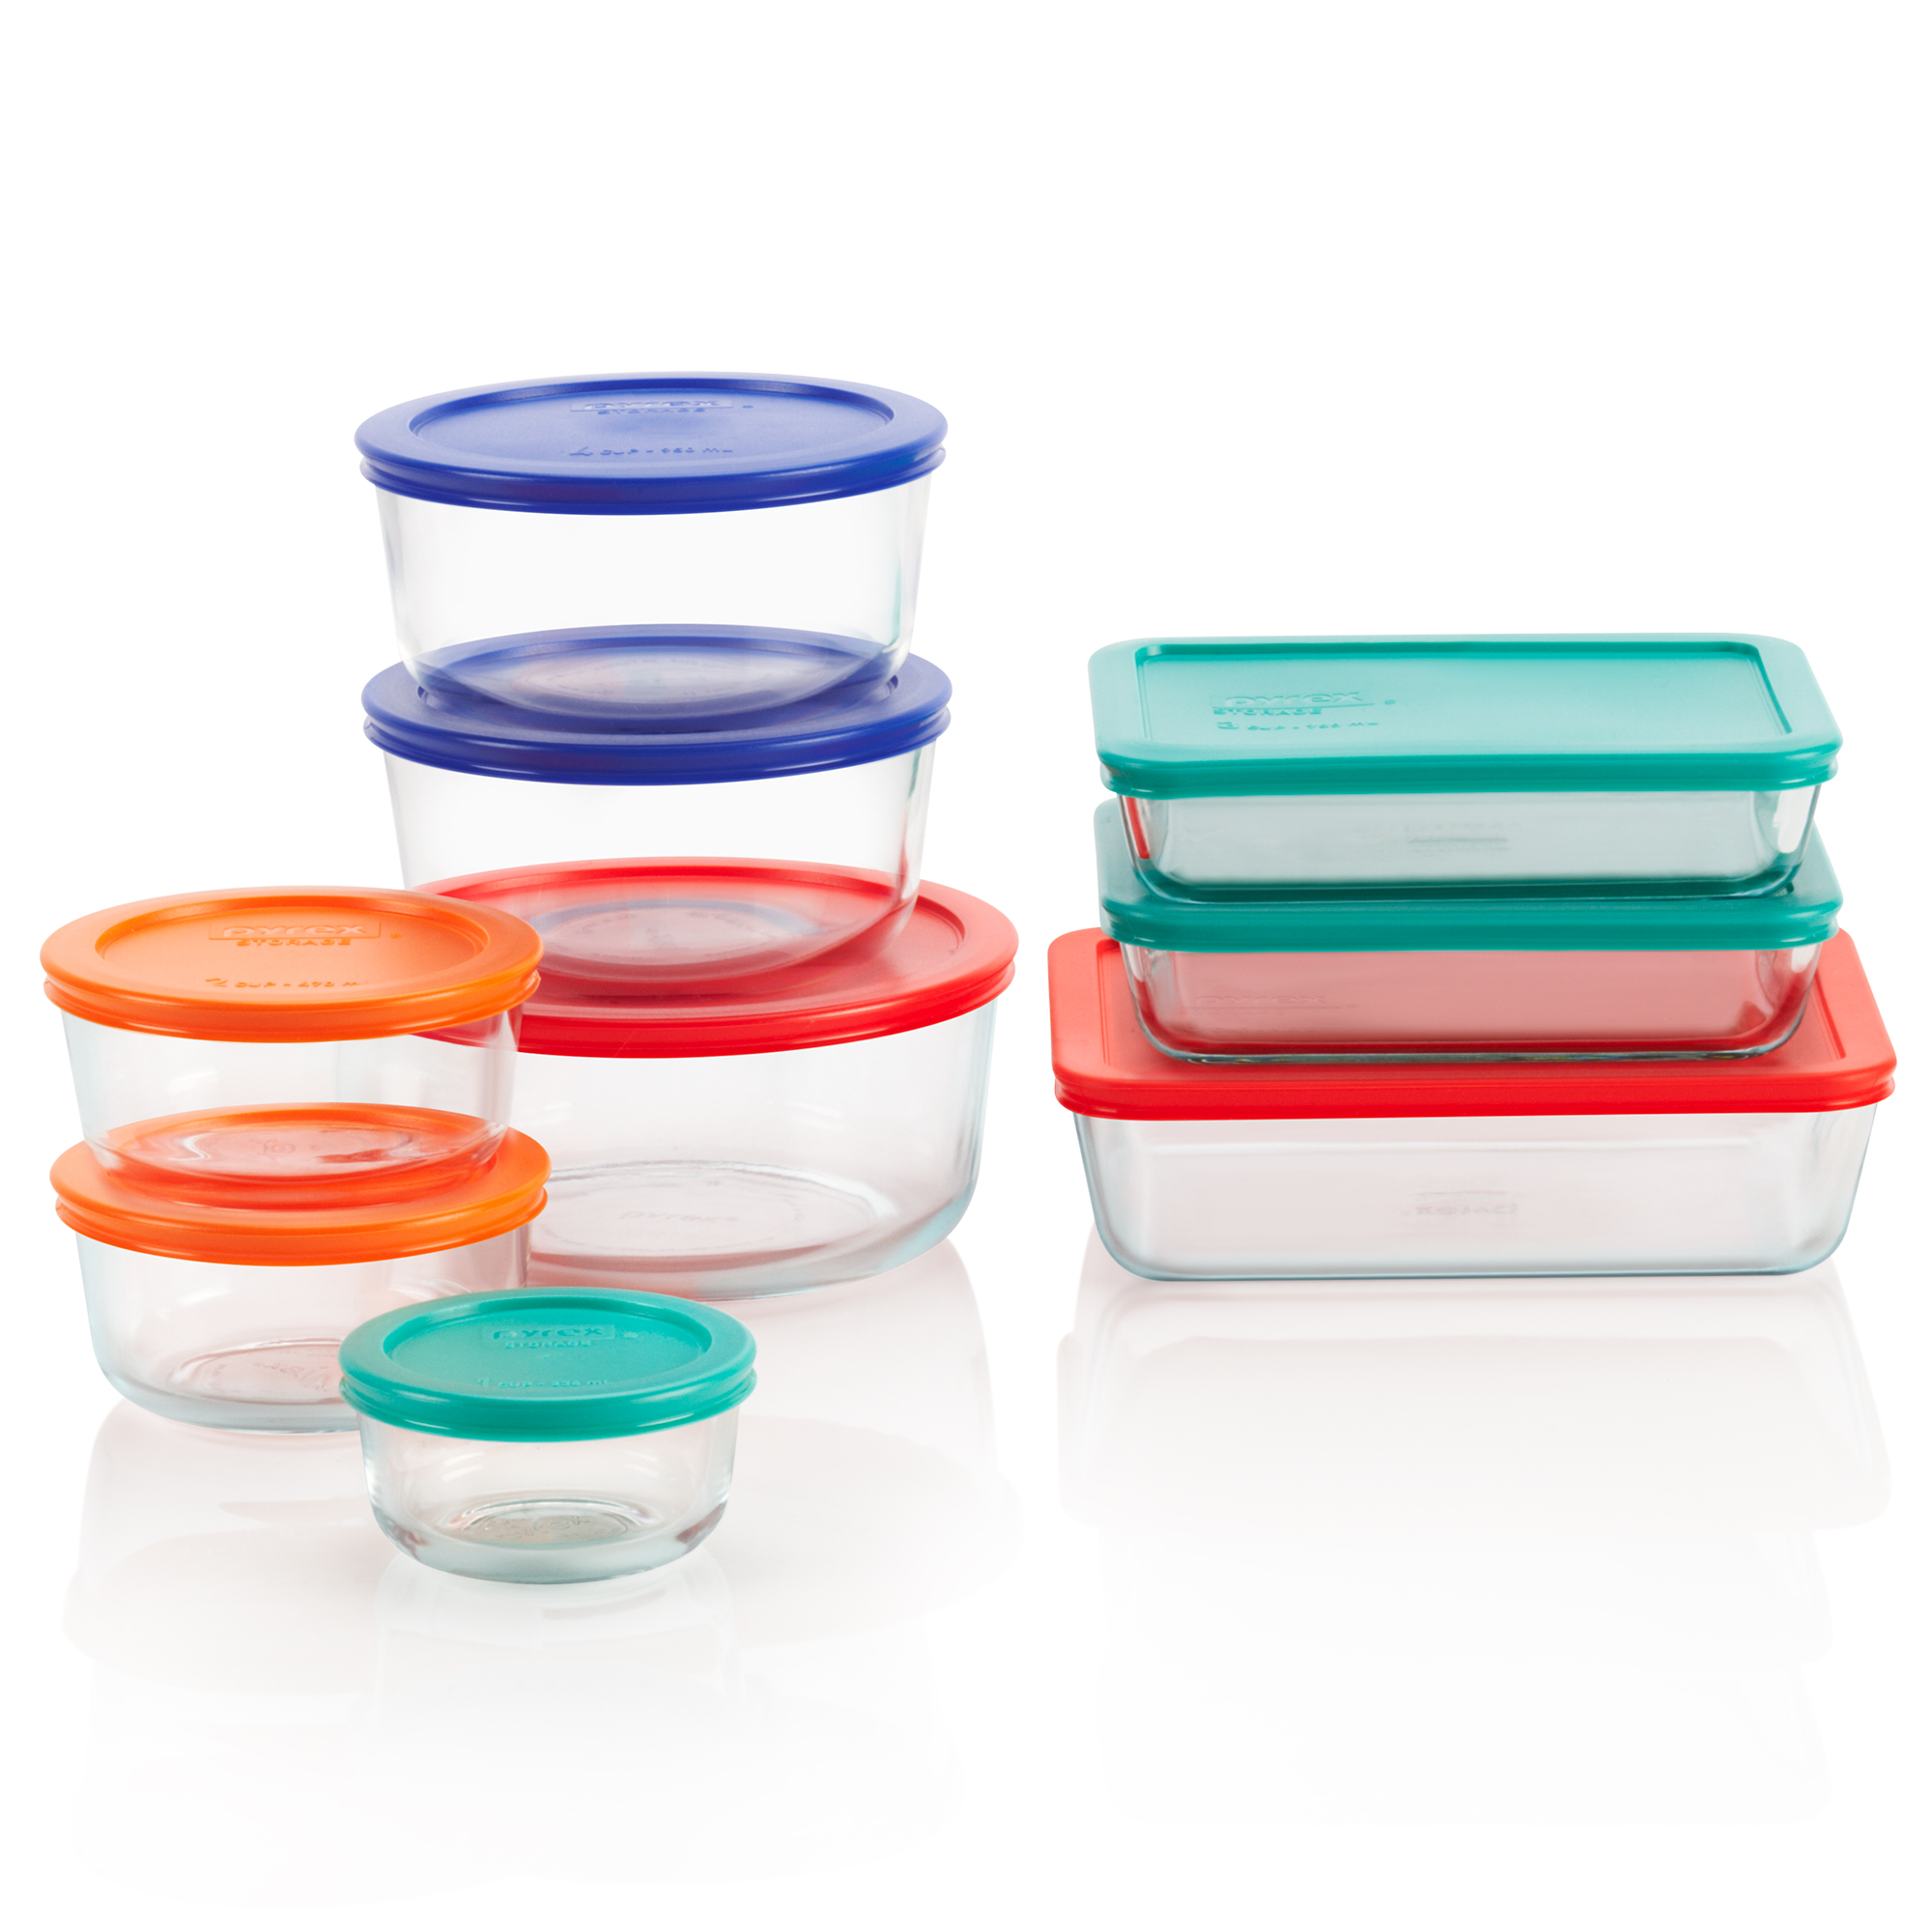 Pyrex 18-piece Glass Food Storage Container Set with Lids - image 1 of 9